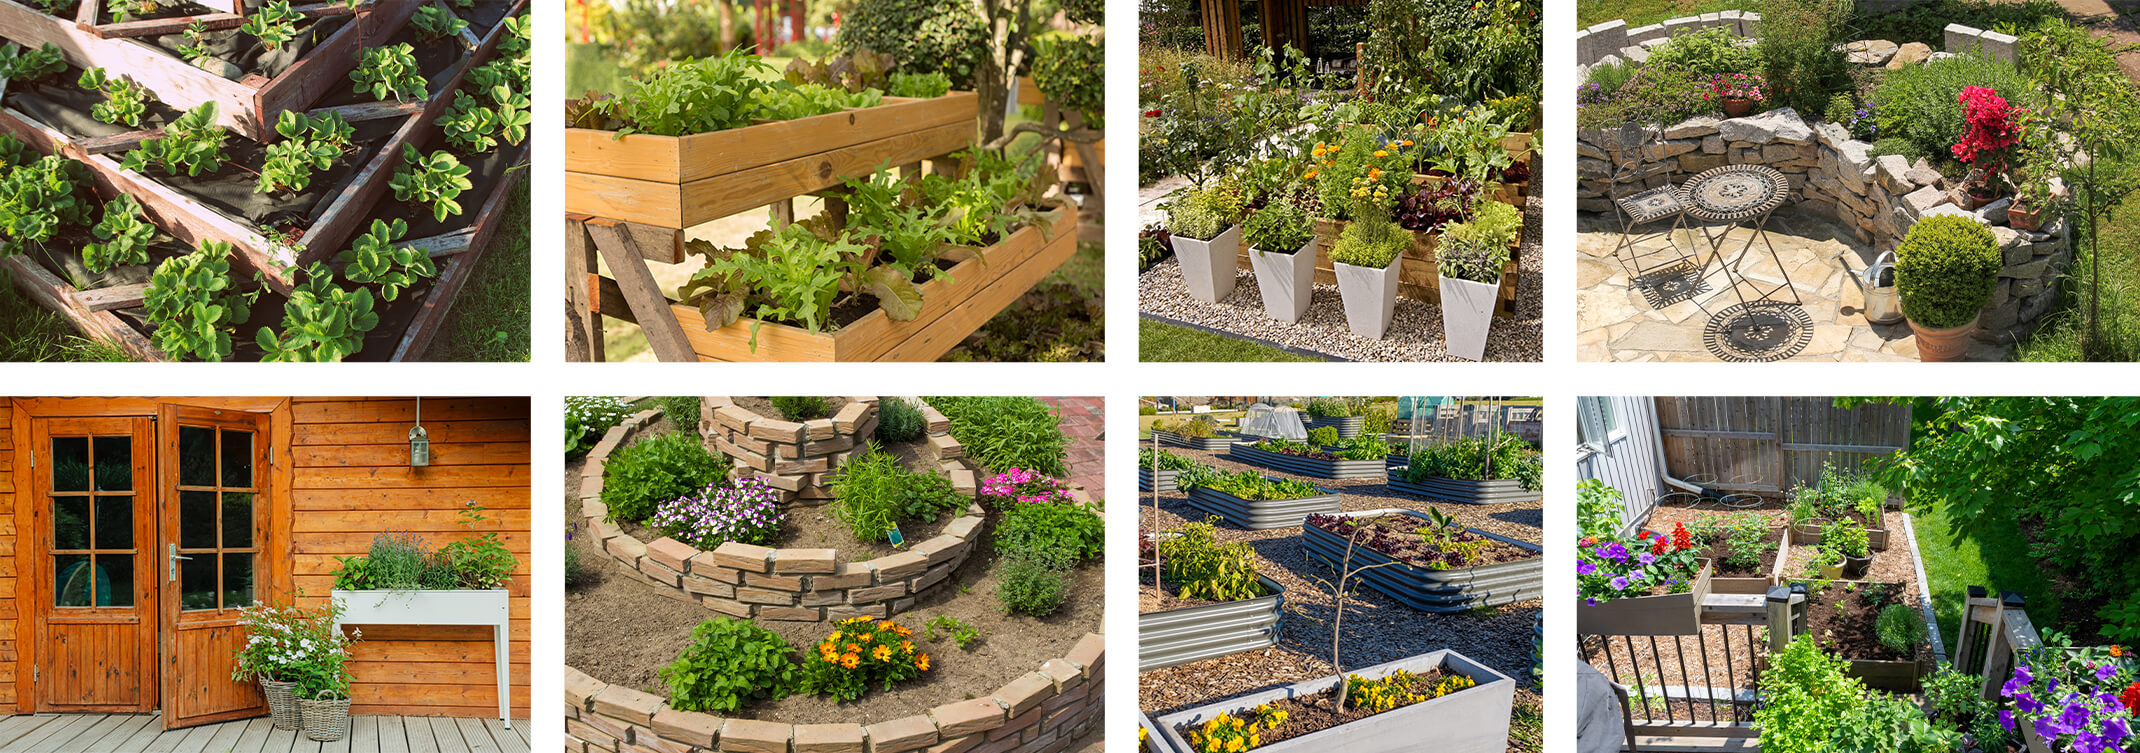 8 images showing a variety of raised garden bed styles - from tall tiered to raised with legs, to shelves, to stone swirls, to metal, to tall planters, to built in custom shapes, and traditional raised wooden garden beds